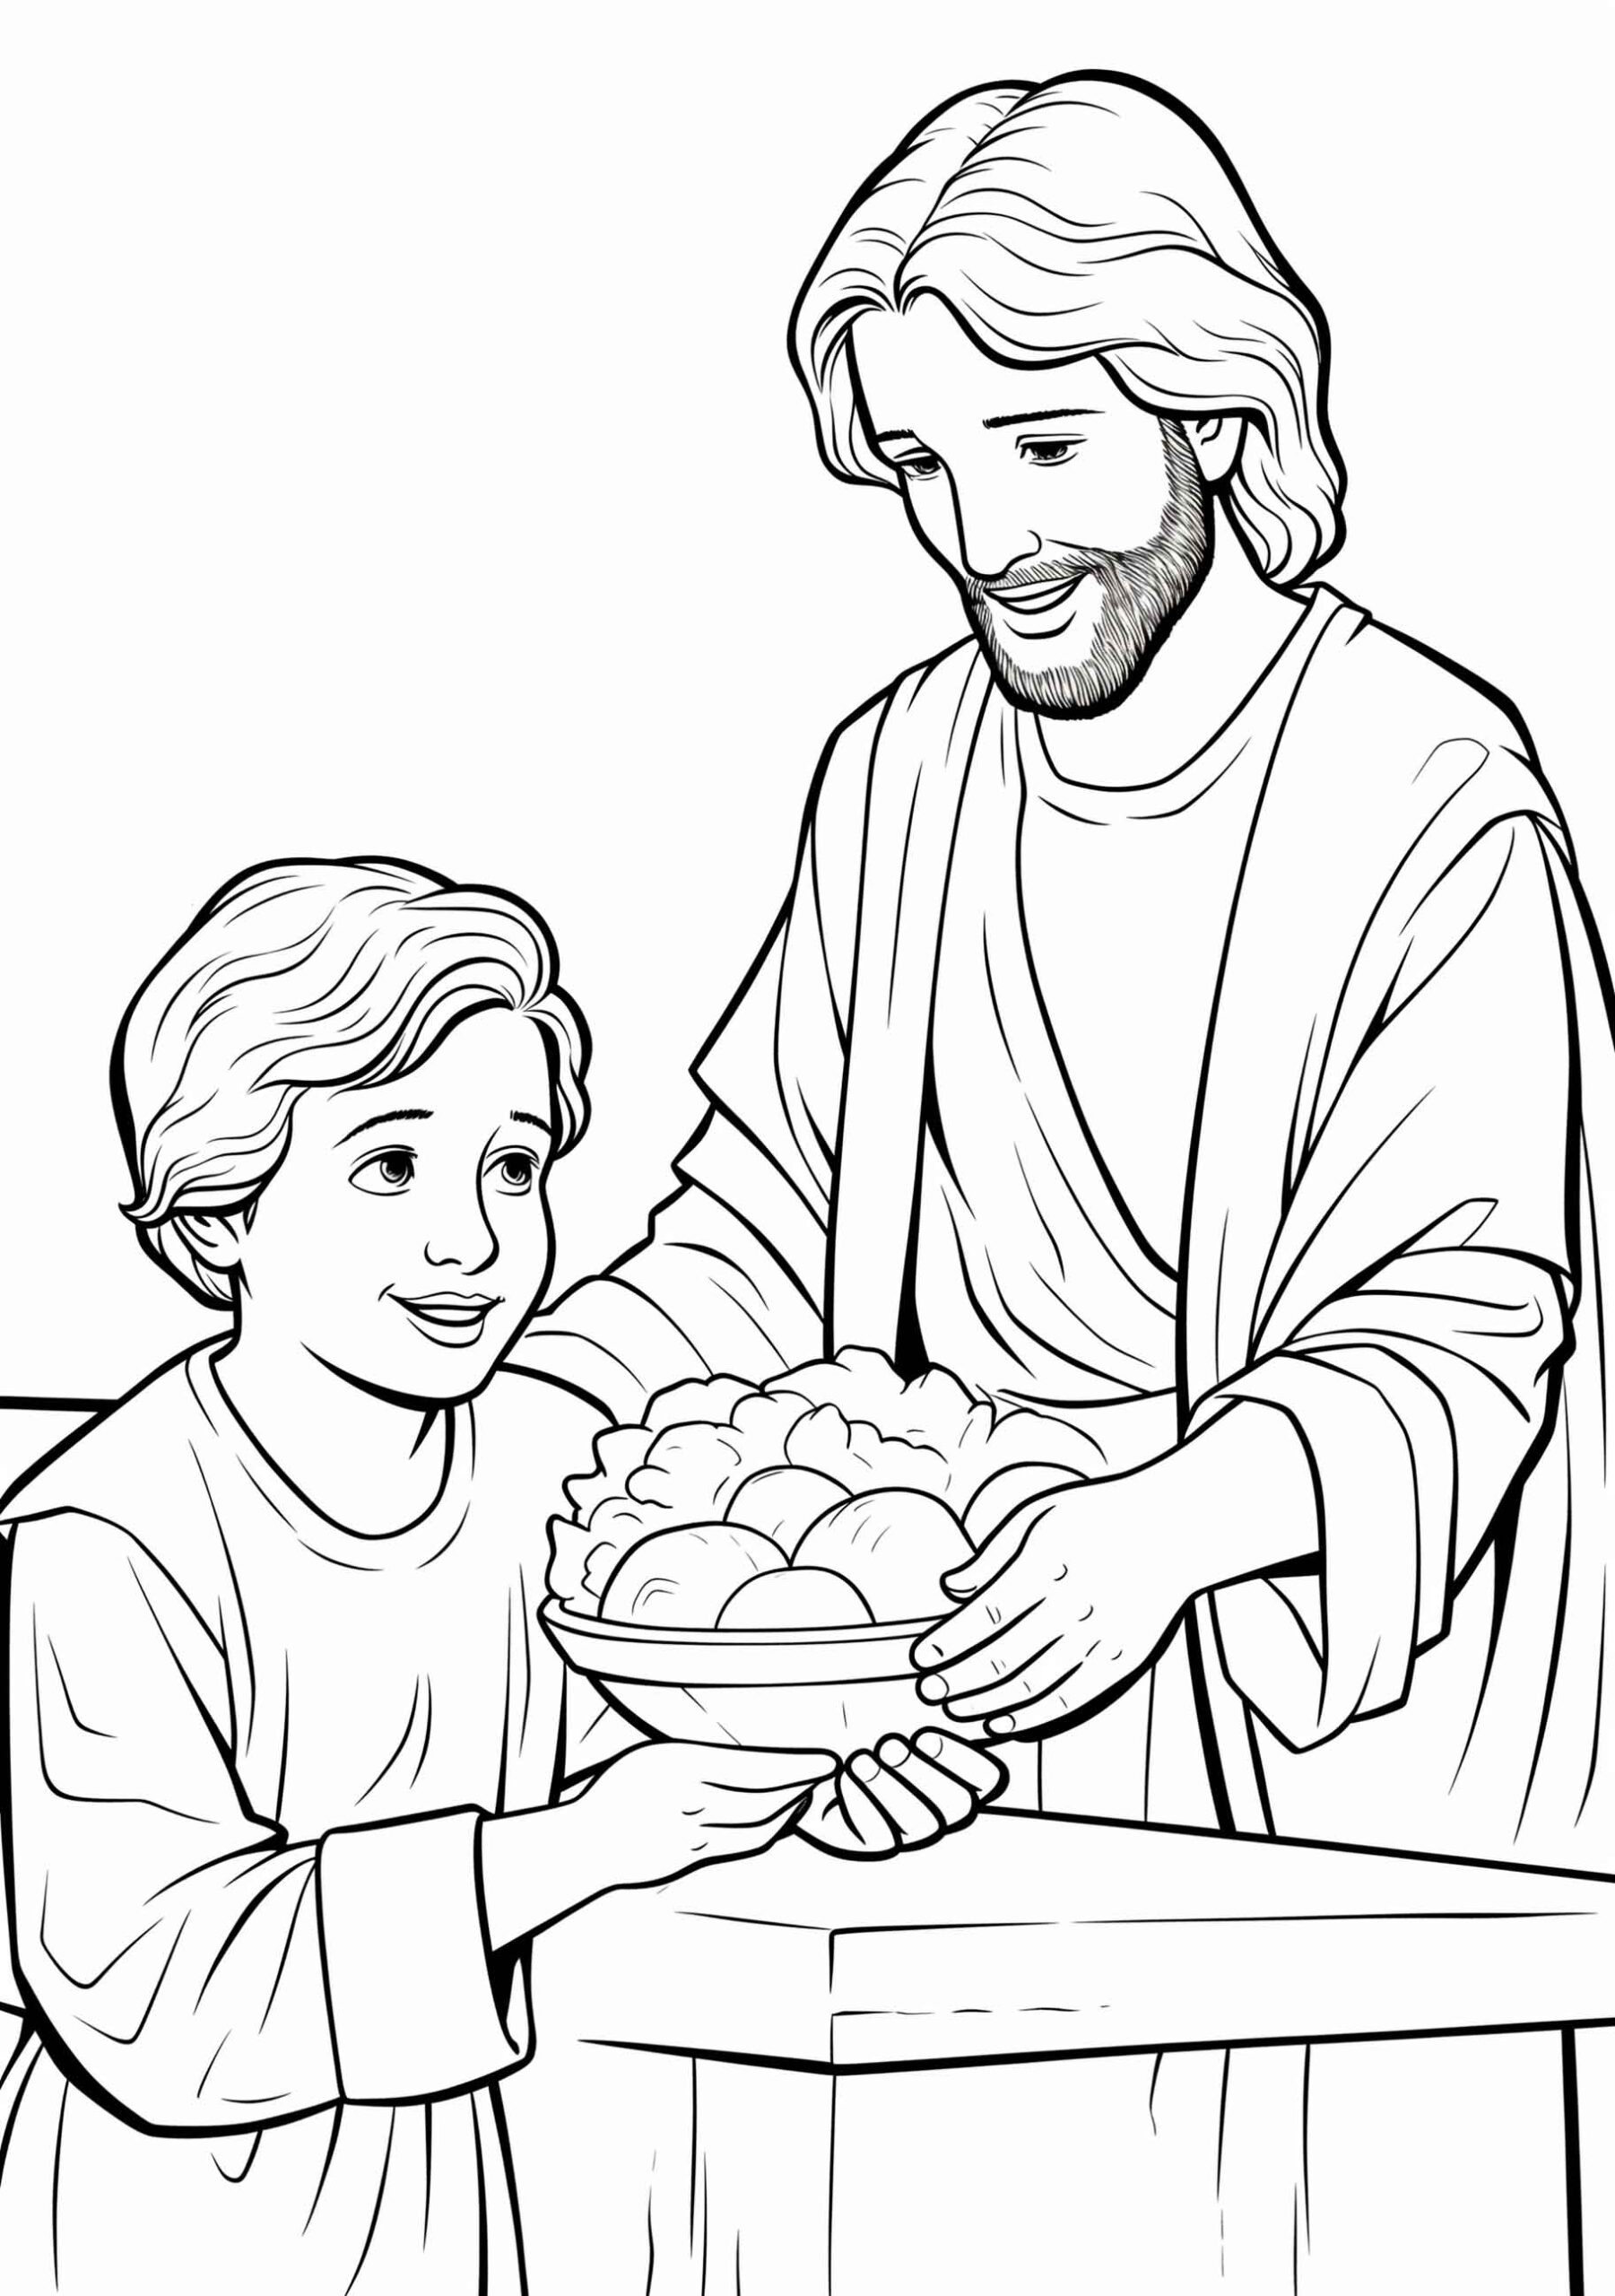 Jesus giving bread to a child in a Jesus Feeds 5000 coloring page